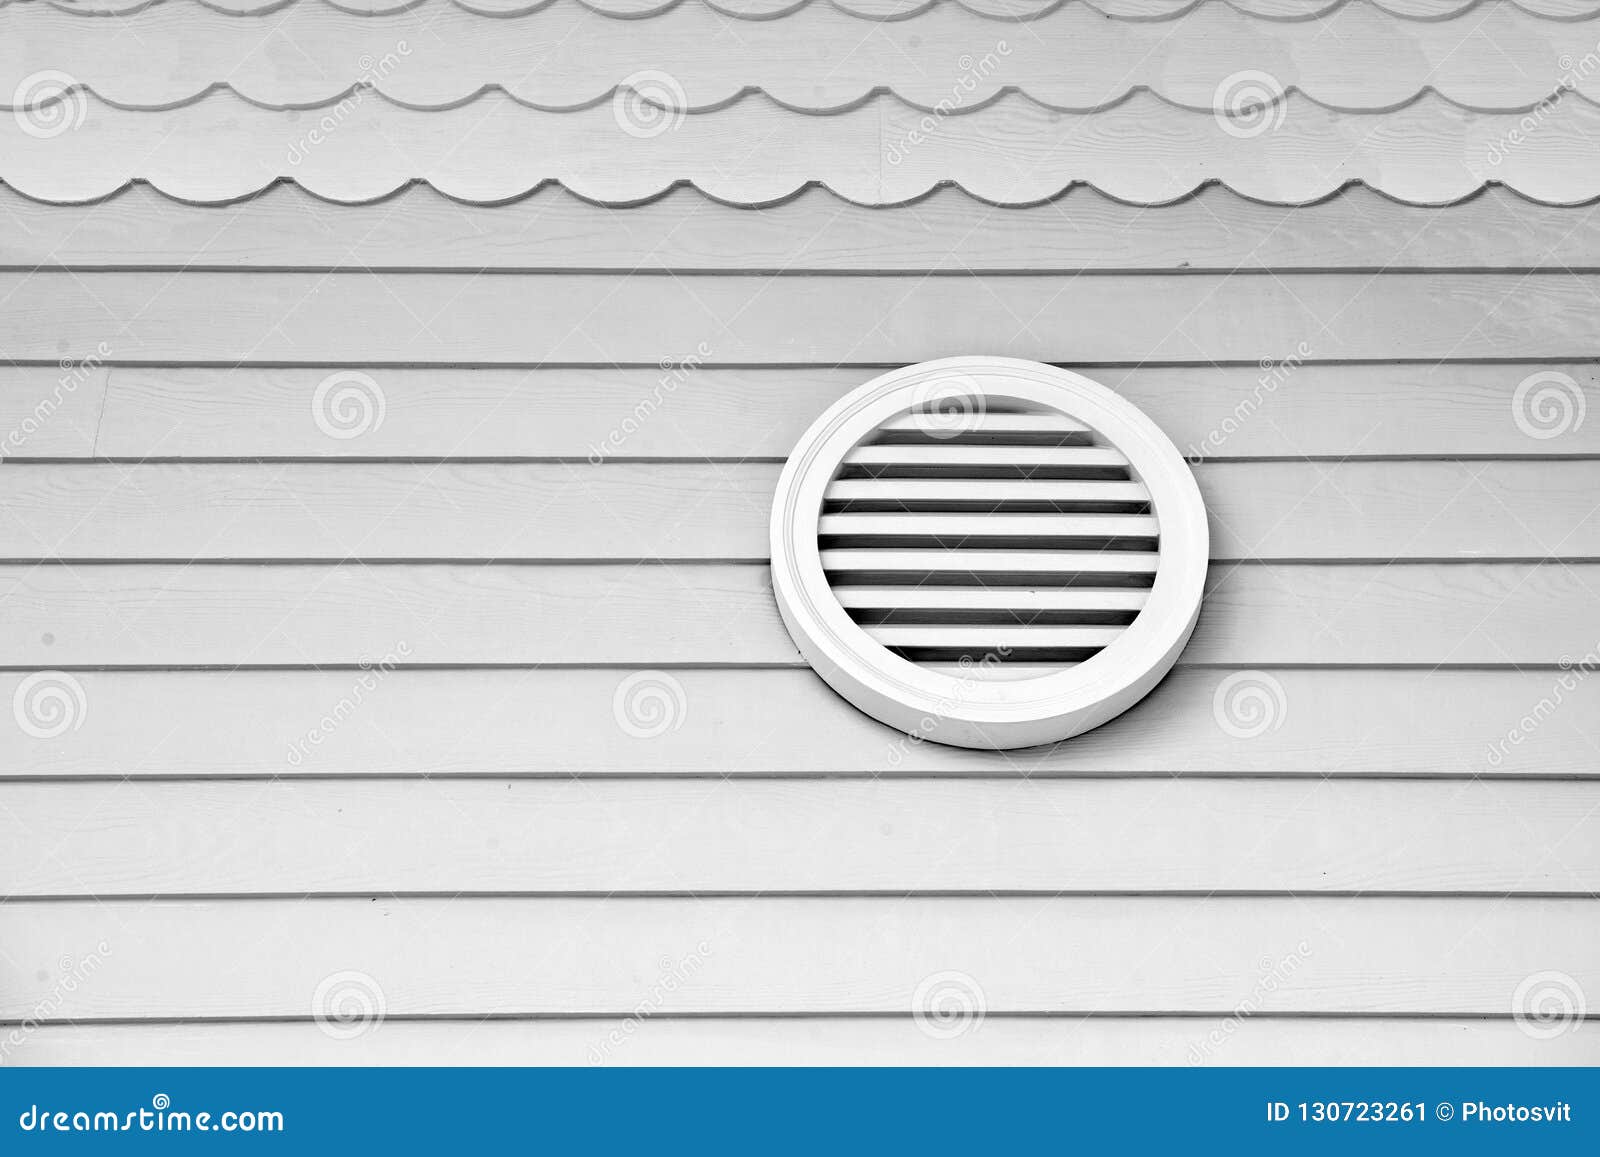 provide fresh air into house. ventilation on house. whole house ventilation systems. ways to ventilate your home. air